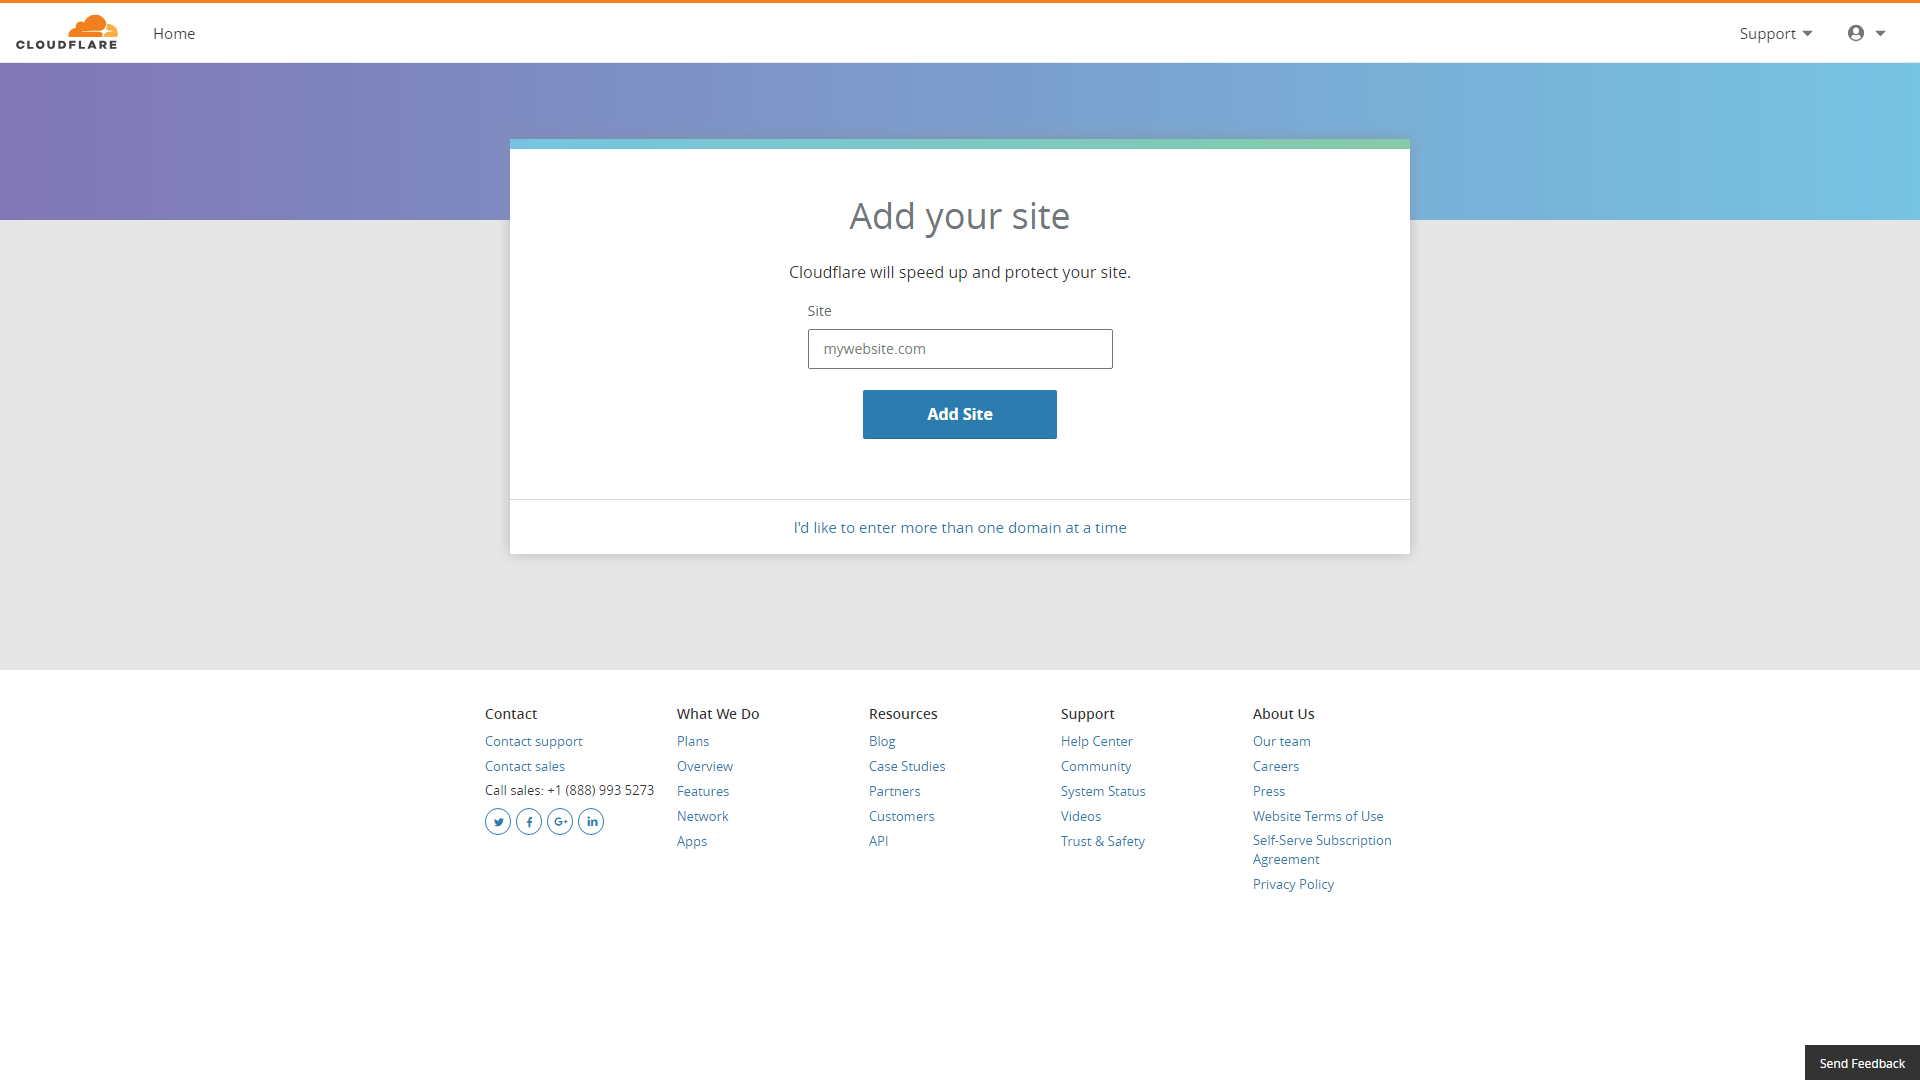 Adding your website's URL to Cloudflare.